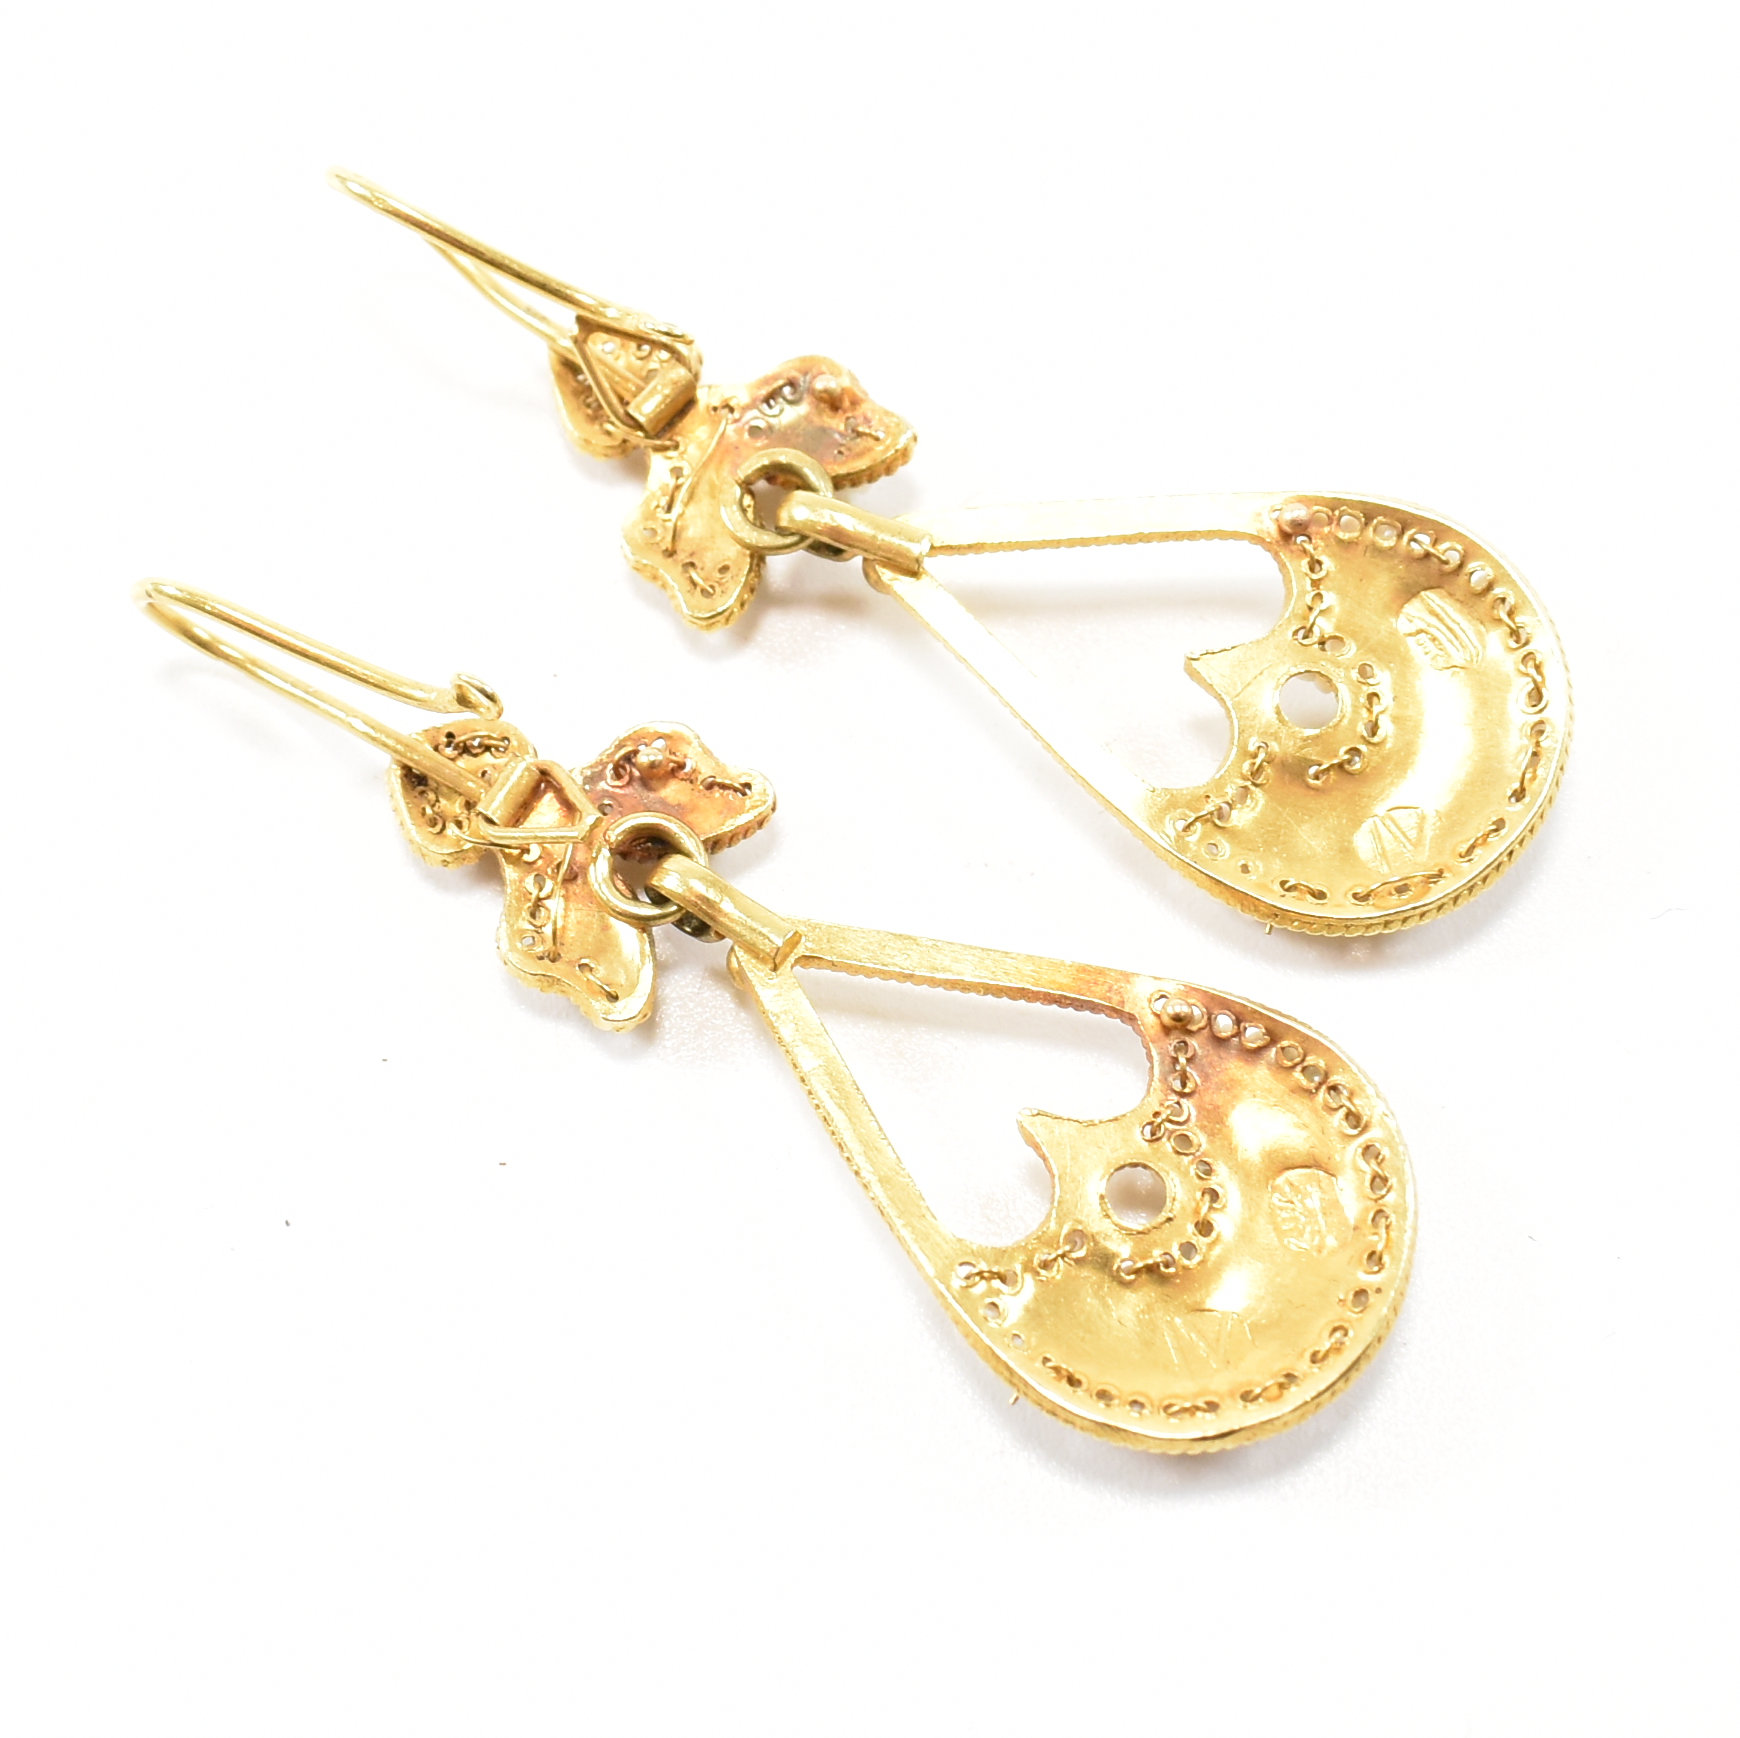 PAIR OF FRENCH 18CT GOLD & SEED PEARL PENDANT EARRINGS - Image 4 of 9